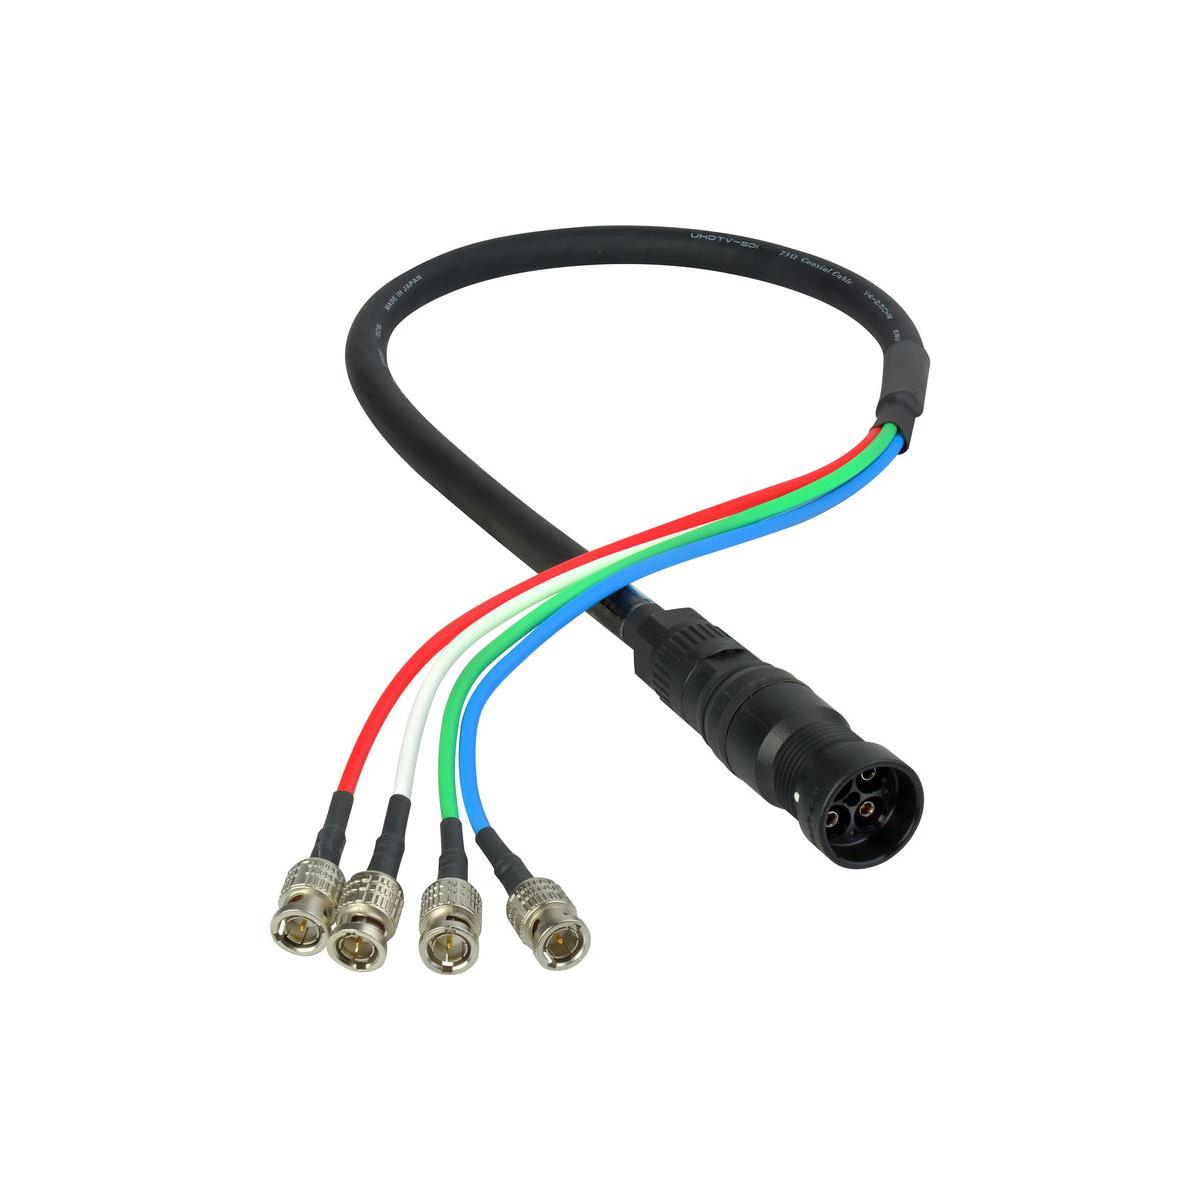 Laird 25' 4K UHD 3G HD-SDI 4-Channel DIN Female to BNC Camera Breakout Cable <b> 4-3G HD-SDI Signal Channel Quick Connect System for 4K/UHD Video Formats </b>One step, quick-connect Laird coax Canare cable assemblies connect 4 channels of 3G HD-SDI signals for 4K/UHD video formats. The Laird cables are assembled with Canare 4 channel, V4-2.5CHW flexible coaxial cable, allowing a break out to 4 Canare BNC or 4 DIN connectors. The Canare male connector, MDM-V4C25HW is designed to mate with the MDF-V4JRU panel mount receptacle which features a 4 DIN pass-through on the back side to increase your connectivity but not your rack space. Laird 4K UHD Canare camera cables assemblies make quick work of keeping everything in line and organized. Available in a variety of lengths. Use with the Canare MDF-V4JRU 4K DIN 1.0/2.3 4-channel chassis mount connector.• Quick connect and disconnect• Multiple 3G-SDI signals to 4K/UHD formats• Canare cable with solid and lightweight nylon resin body• Push-pull locking Canare coax connectors with protective rubber boots• High performance Canare BCP-B25HW BNC or 4 DCP-C25HD DIN connectors• Made in the USA in a Canare trained fiber shop• Canare V4-2.5CHW 4-Channel 4K 75Ohms Coaxial Cable• 4 DIN 1.0/2.3 connectors• MDF-V4JRU accepts MDM-V4C25HW and also DIN 1.0/2.3 plugs<b> Applications </b>• High density 3G-SDI• applications• Mobile trucks• Fly packs• Studios• 4K transmission• Consolidate HD-SDI lines